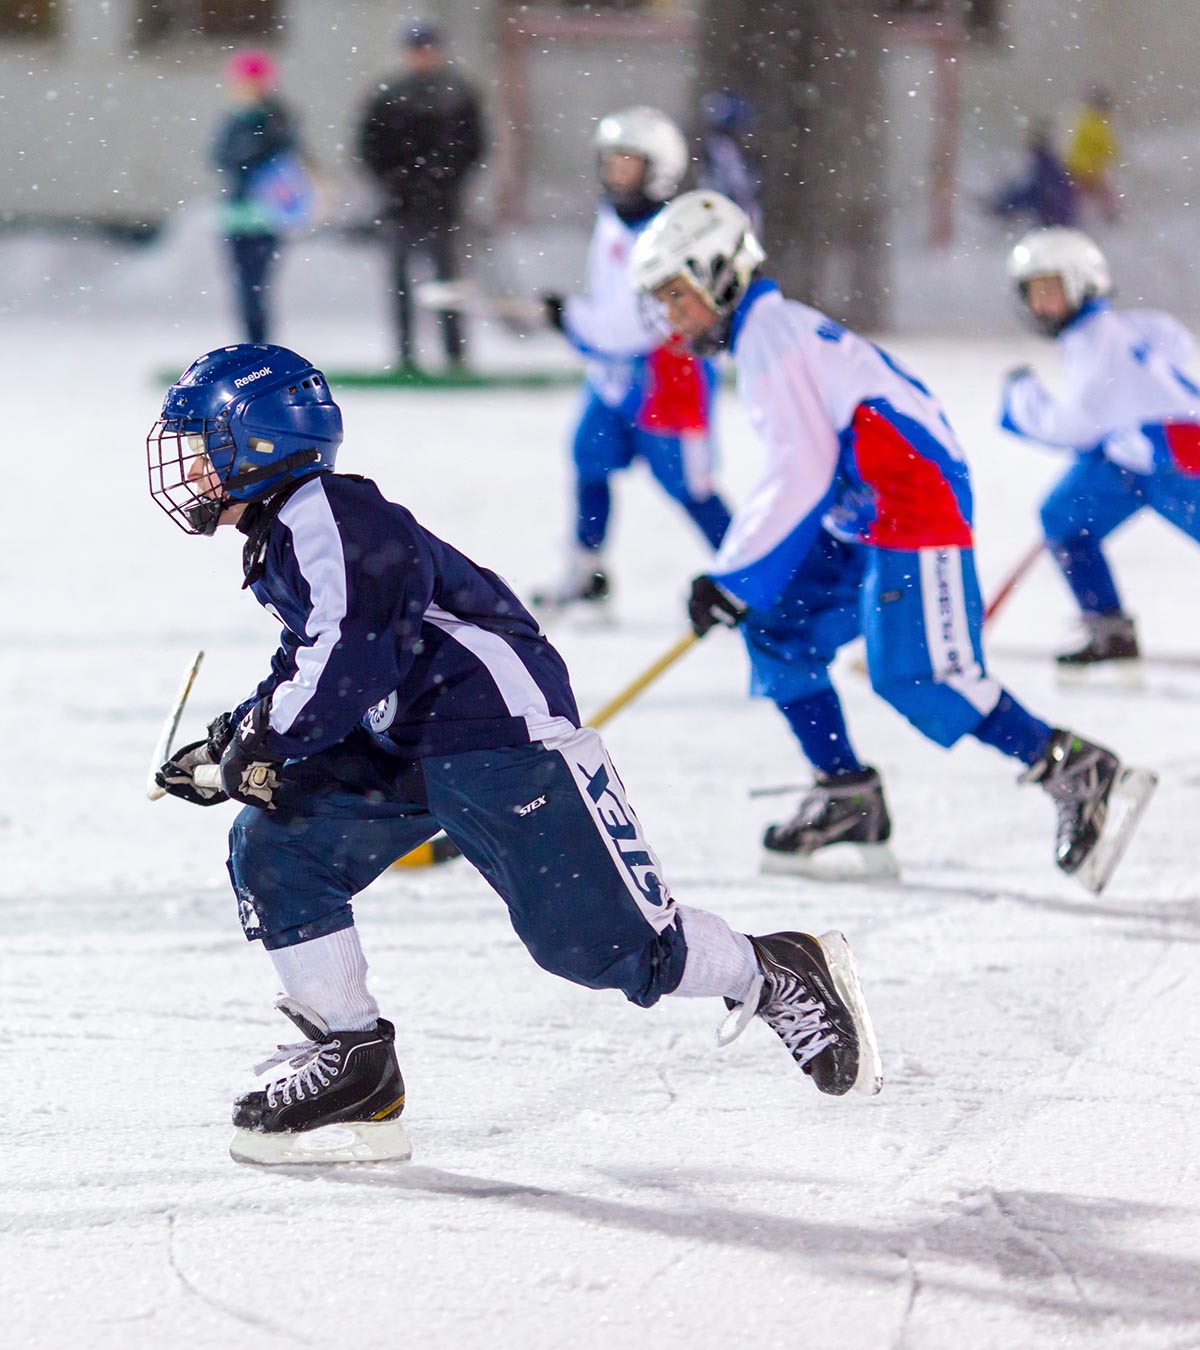 Top 10 Hockey Facts, Rules, And Safety Tips For Kids